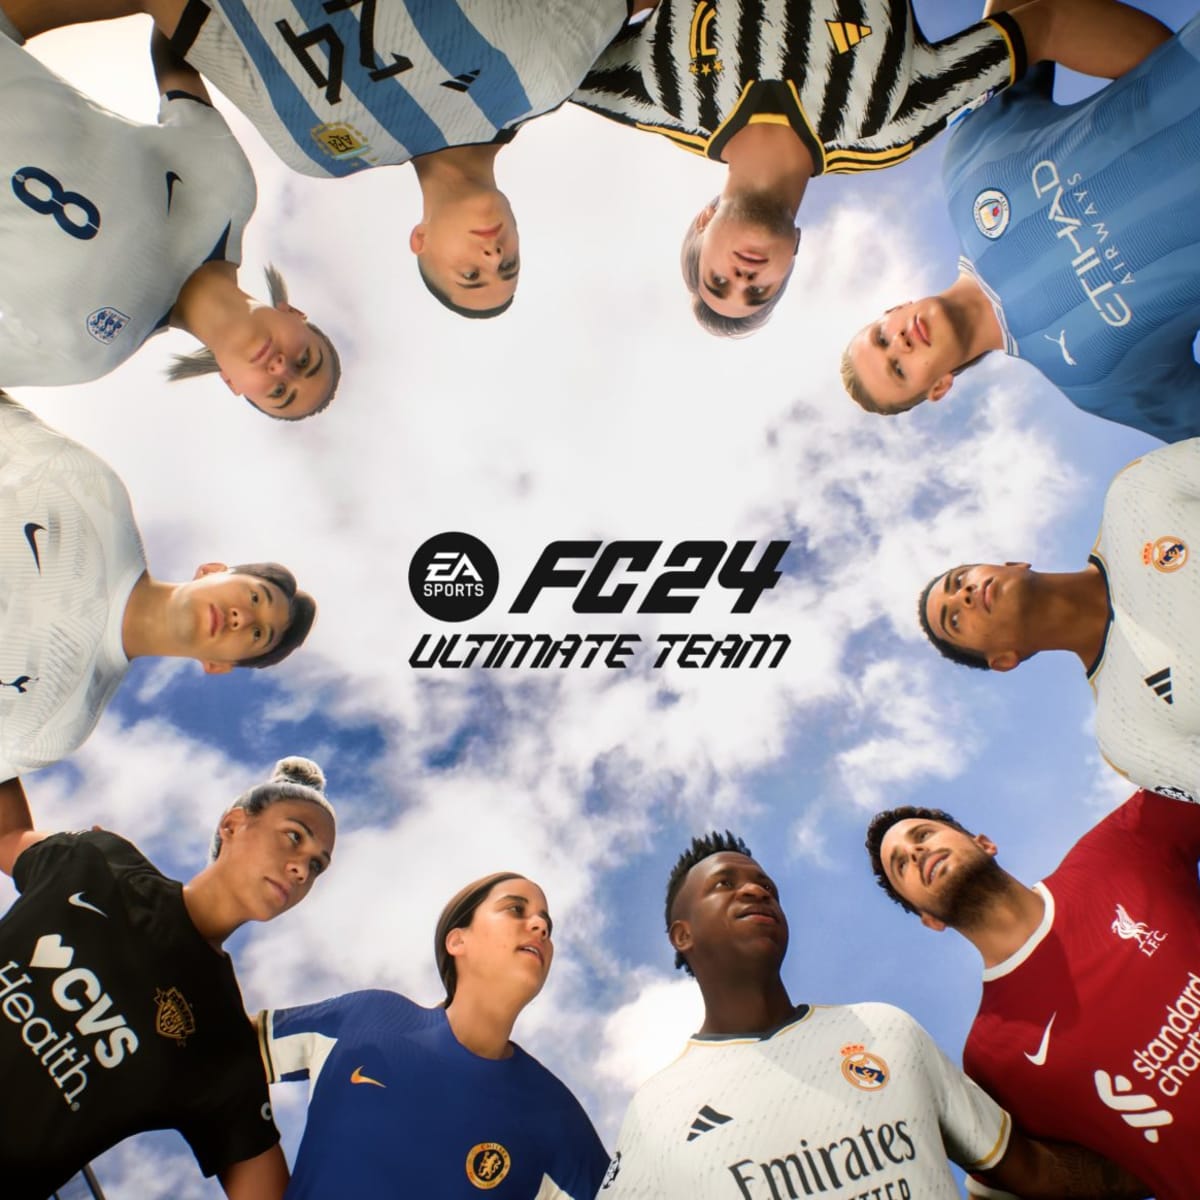 EA SPORTS FC 24 Release Date, Pre-Order Bonuses & Early Access